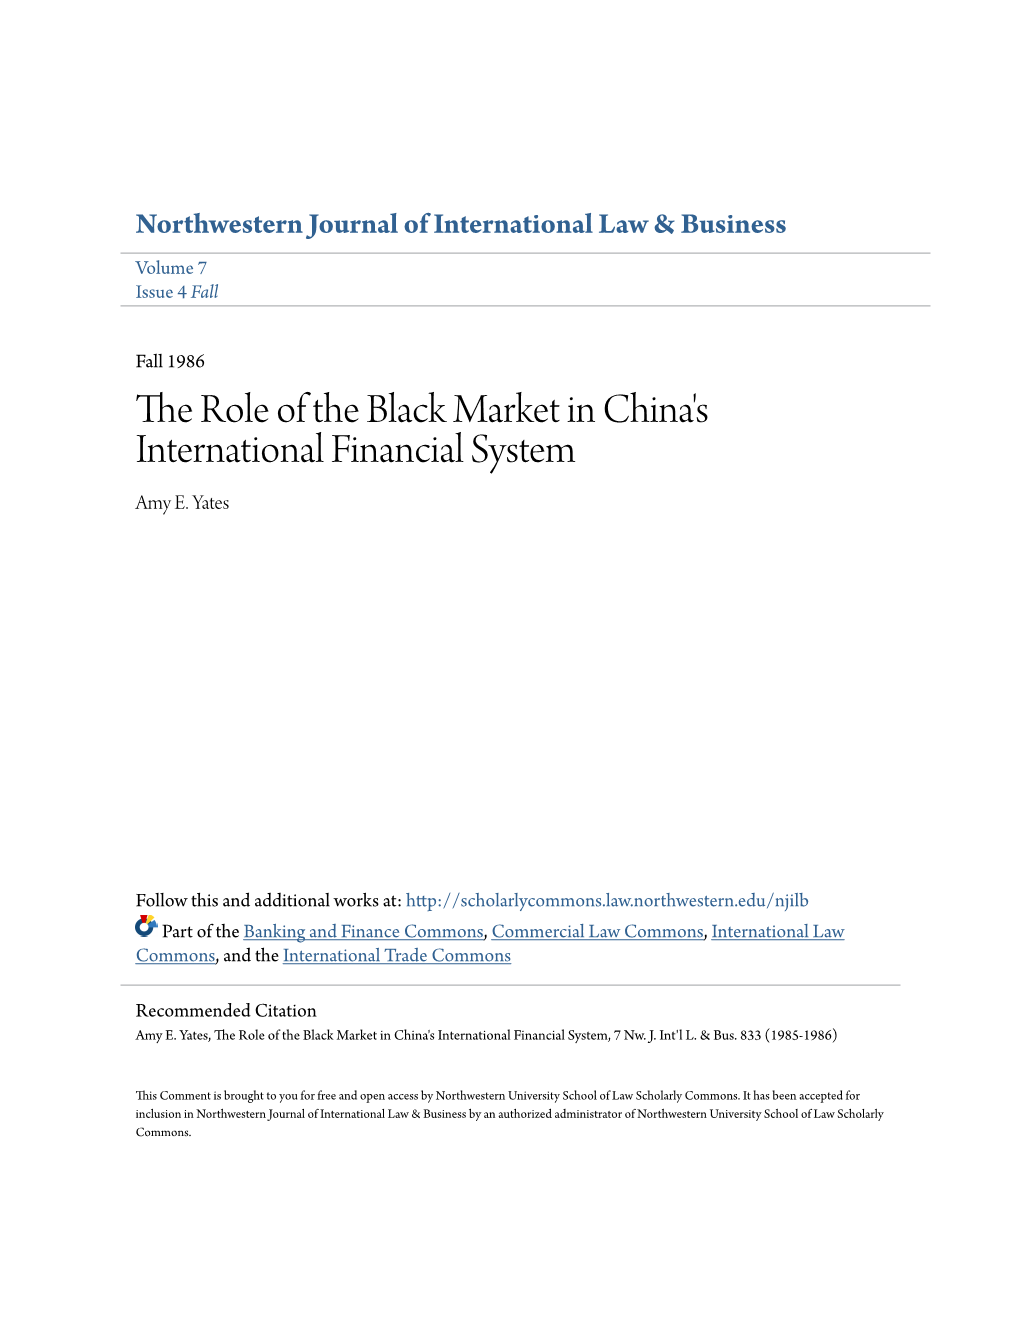 The Role of the Black Market in China's International Financial System Amy E